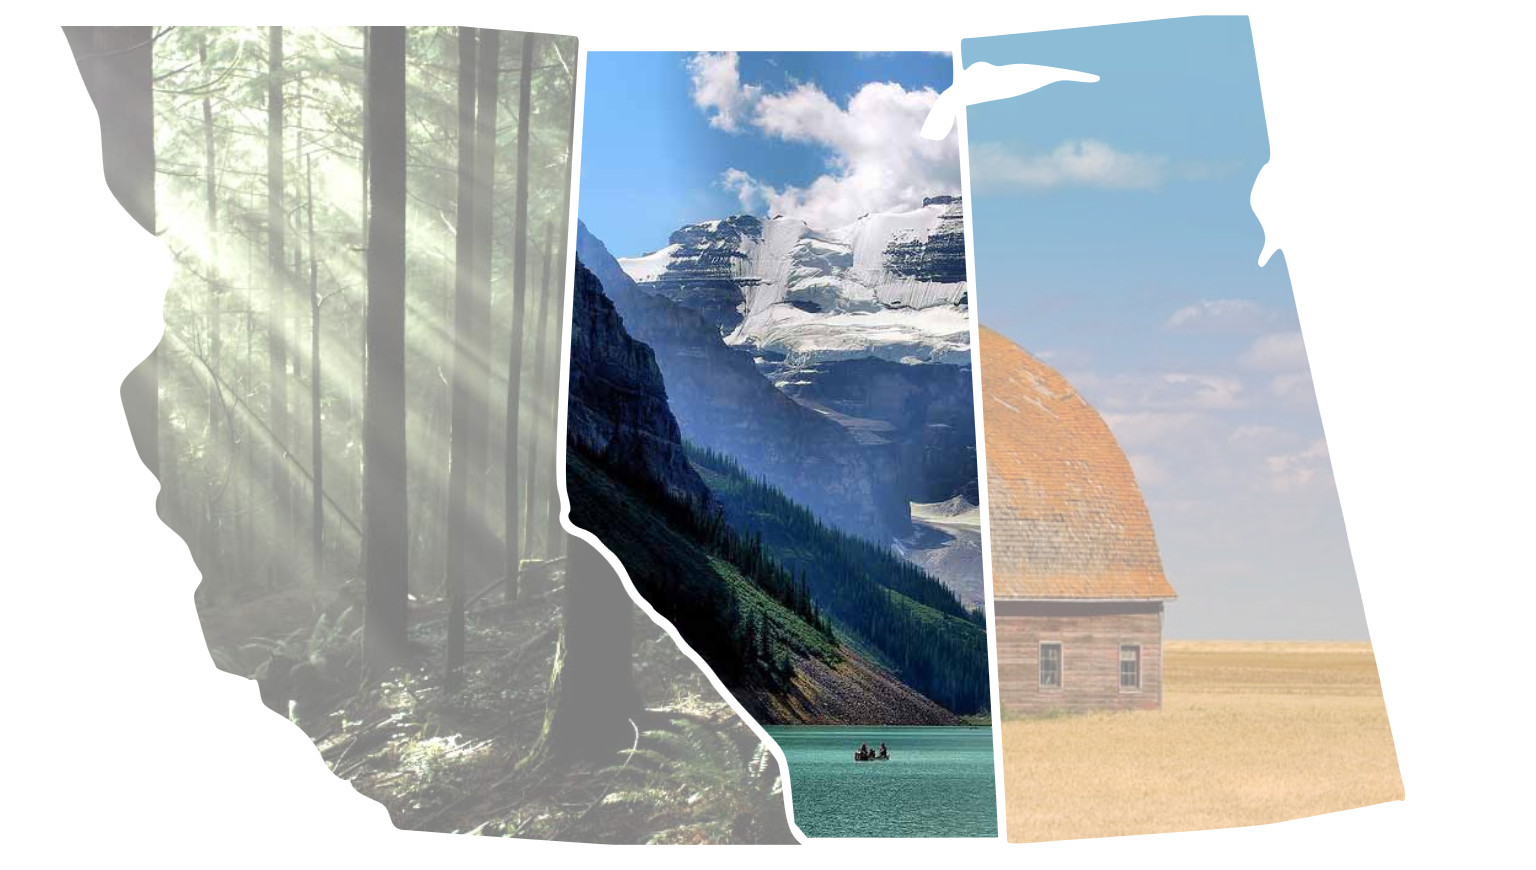 Three photographs: sunlight forest, a mountain lake, and a prairie farm field, each clipped to fit an artistic approximation of the map-shapes of Canada's three western-most provinces (British Columbia, Alberta, and Saskatchewan).  The forest and the field are faded out; the mountain scene is drawn in full color.  The shapes are such that if the photographs were full rectangles, they would overlap.  Diagonal lines in the photographs are aligned to provide visual continuity between the very different scenes.